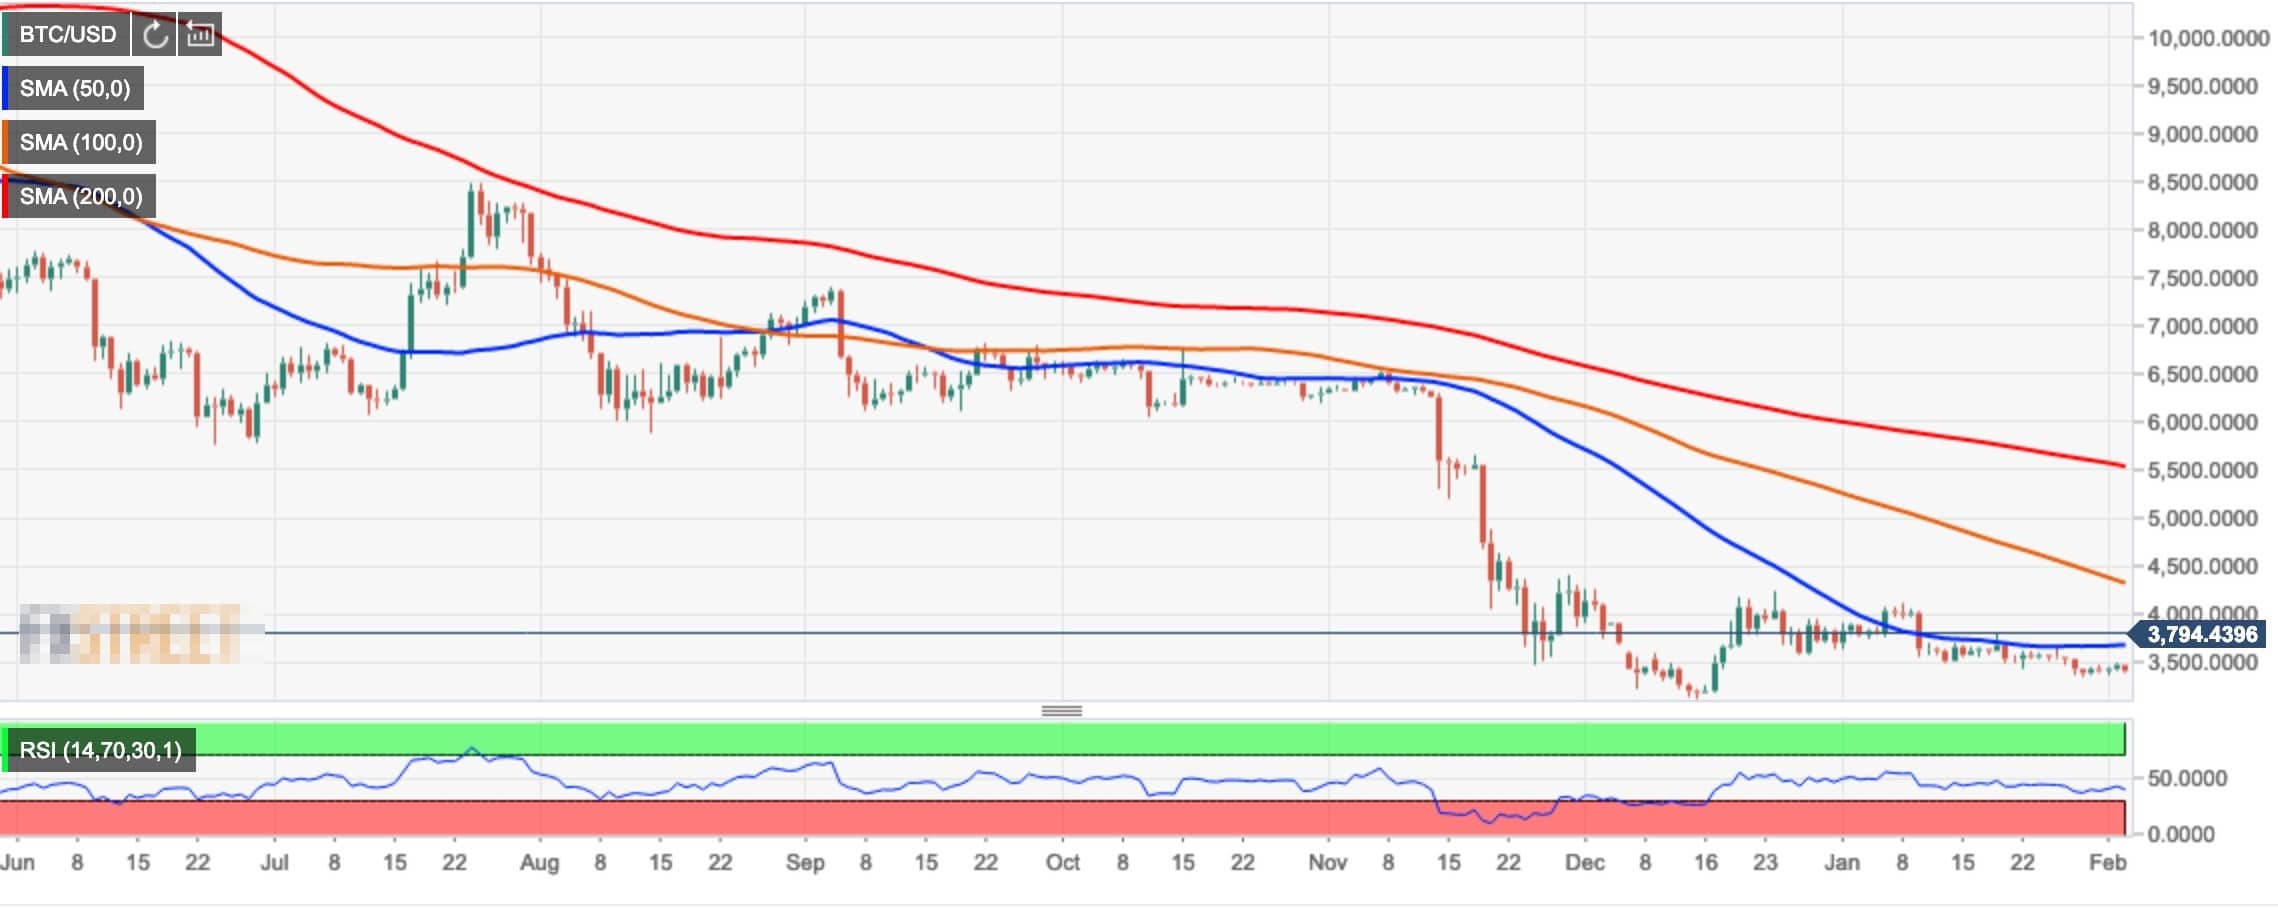 Bitcoin overview: BTC is a lousy investment - Apple's co ...